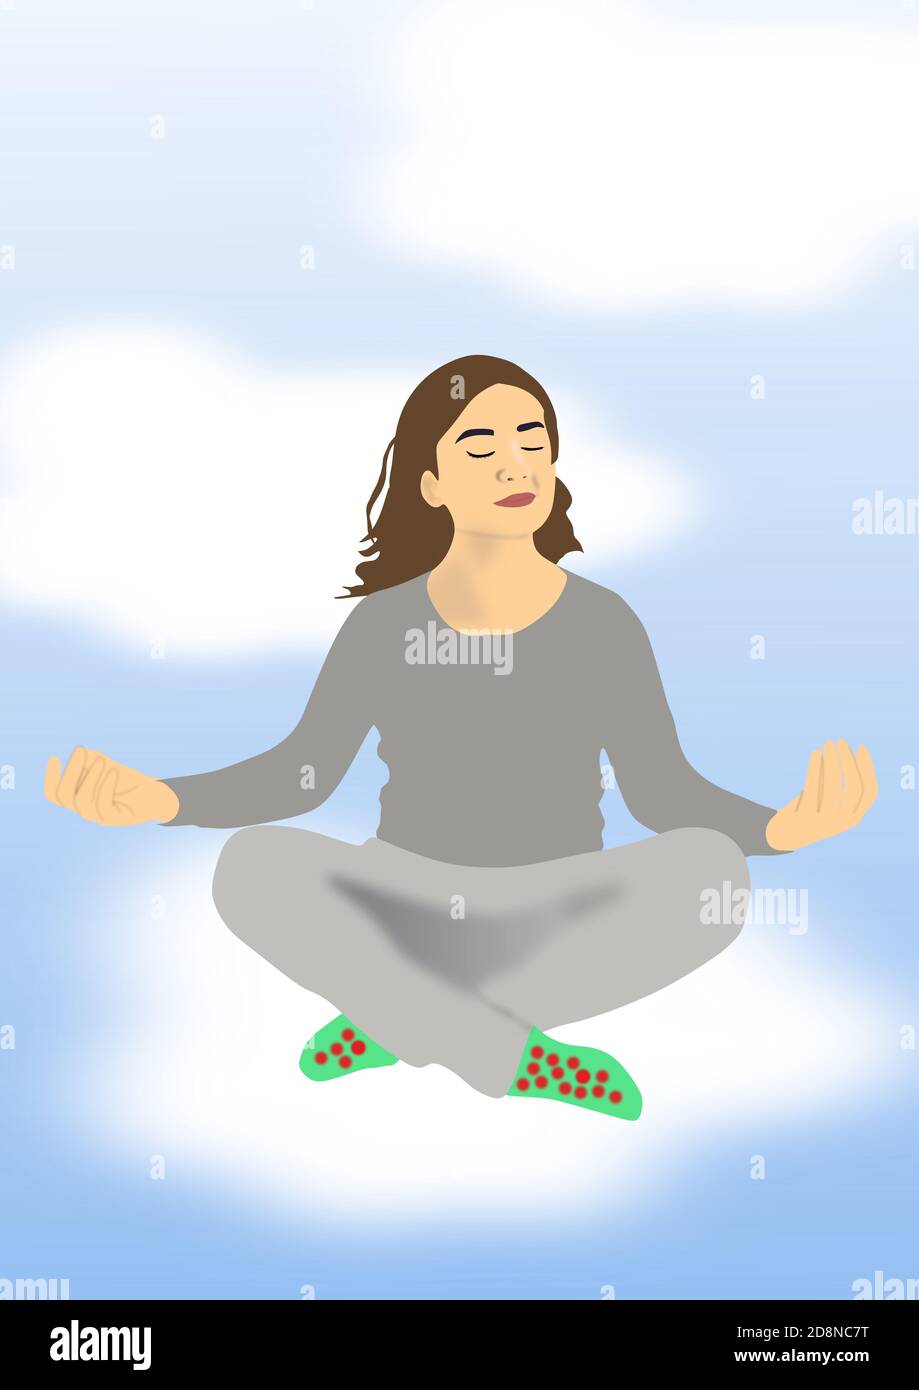 Woman in yoga position over clouds. Stock Photo